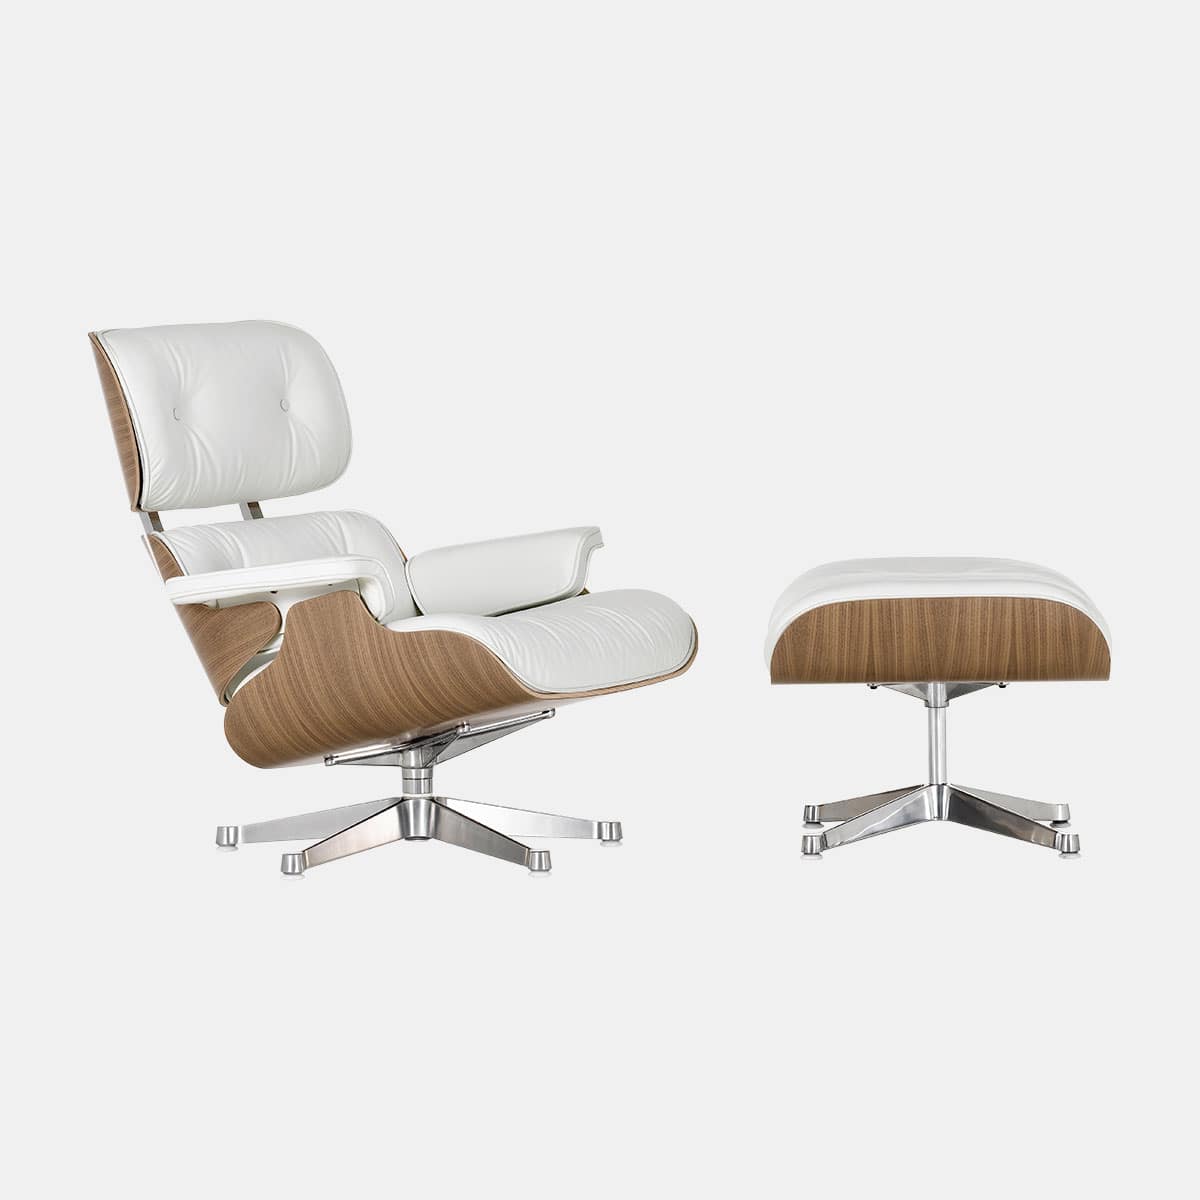 vitra-charles-ray-eames-lounge-chair-ottoman-walnoot-wit-leder-premium-snow-aluminium-gepolijst-001shop